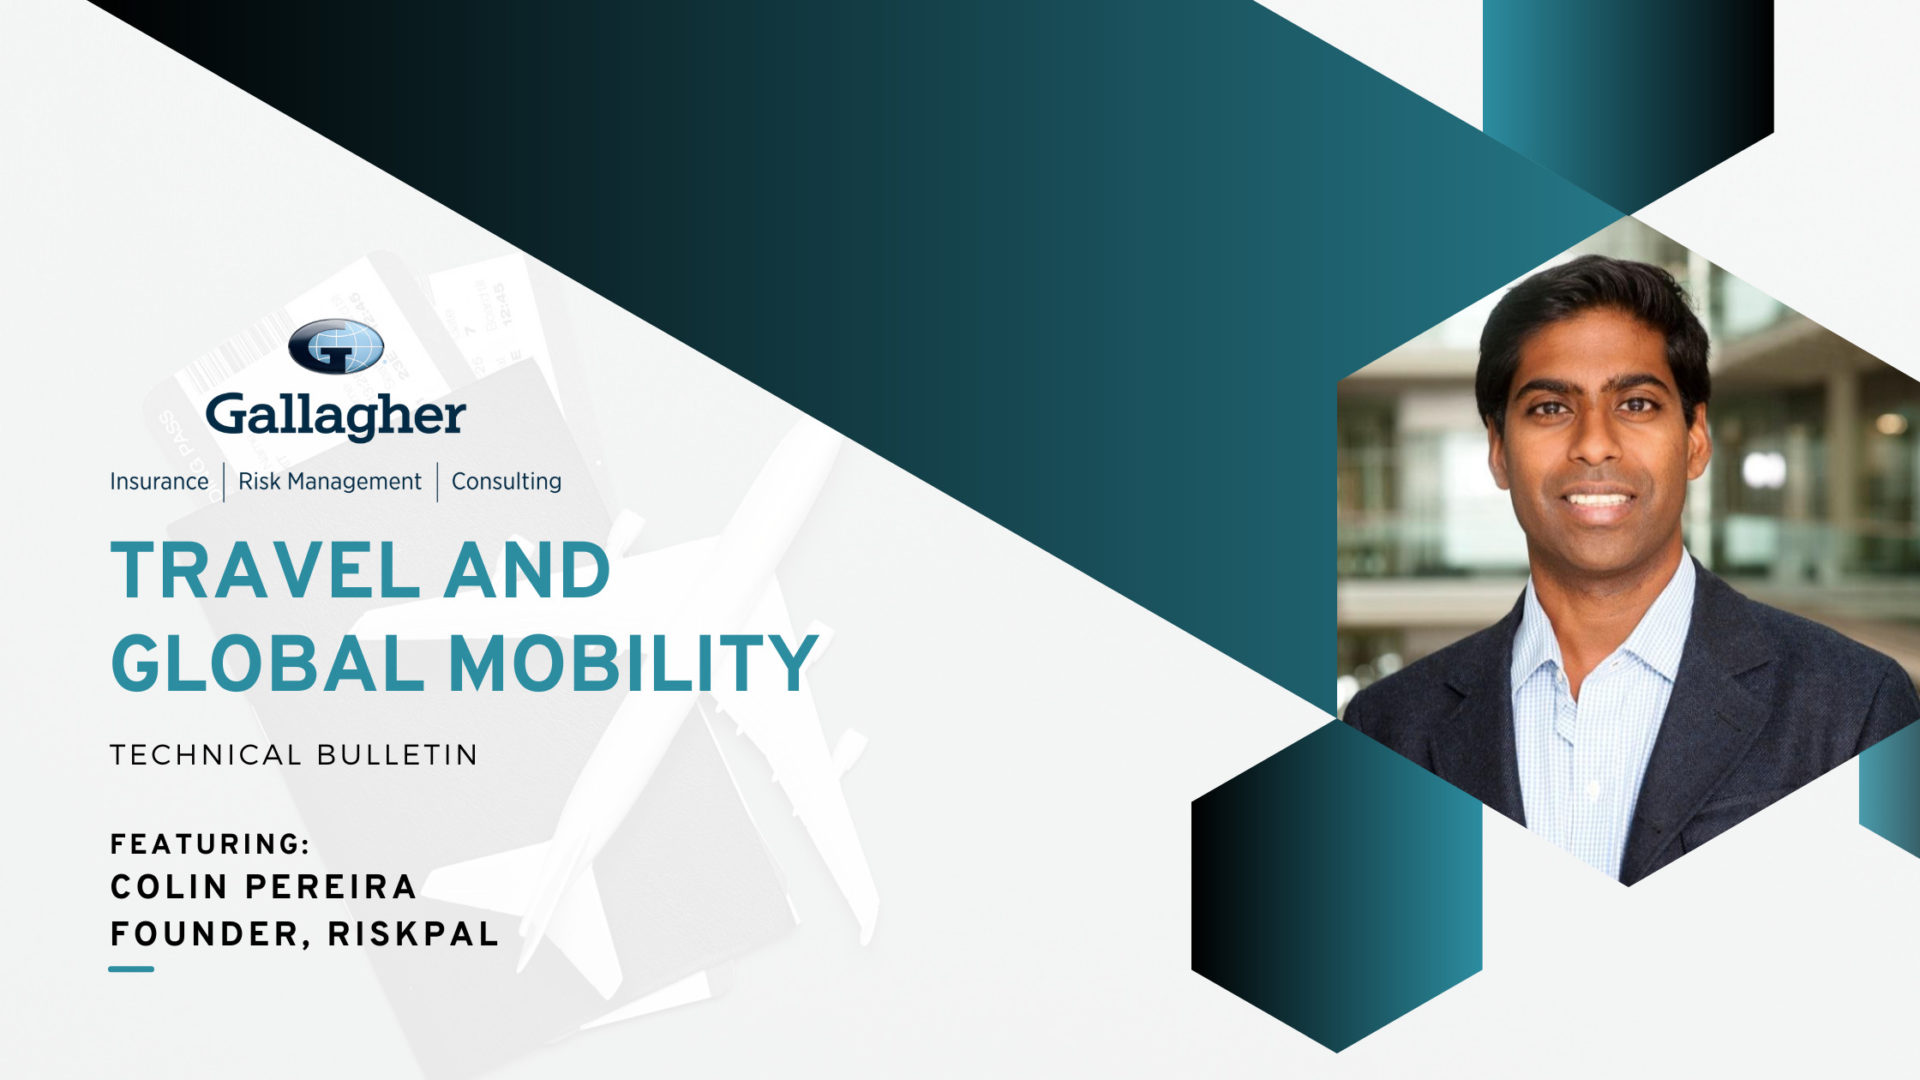 TRAVEL AND GLOBAL MOBILITY Technical Bulletin- Featuring Colin Pereira, Founder, RiskPal